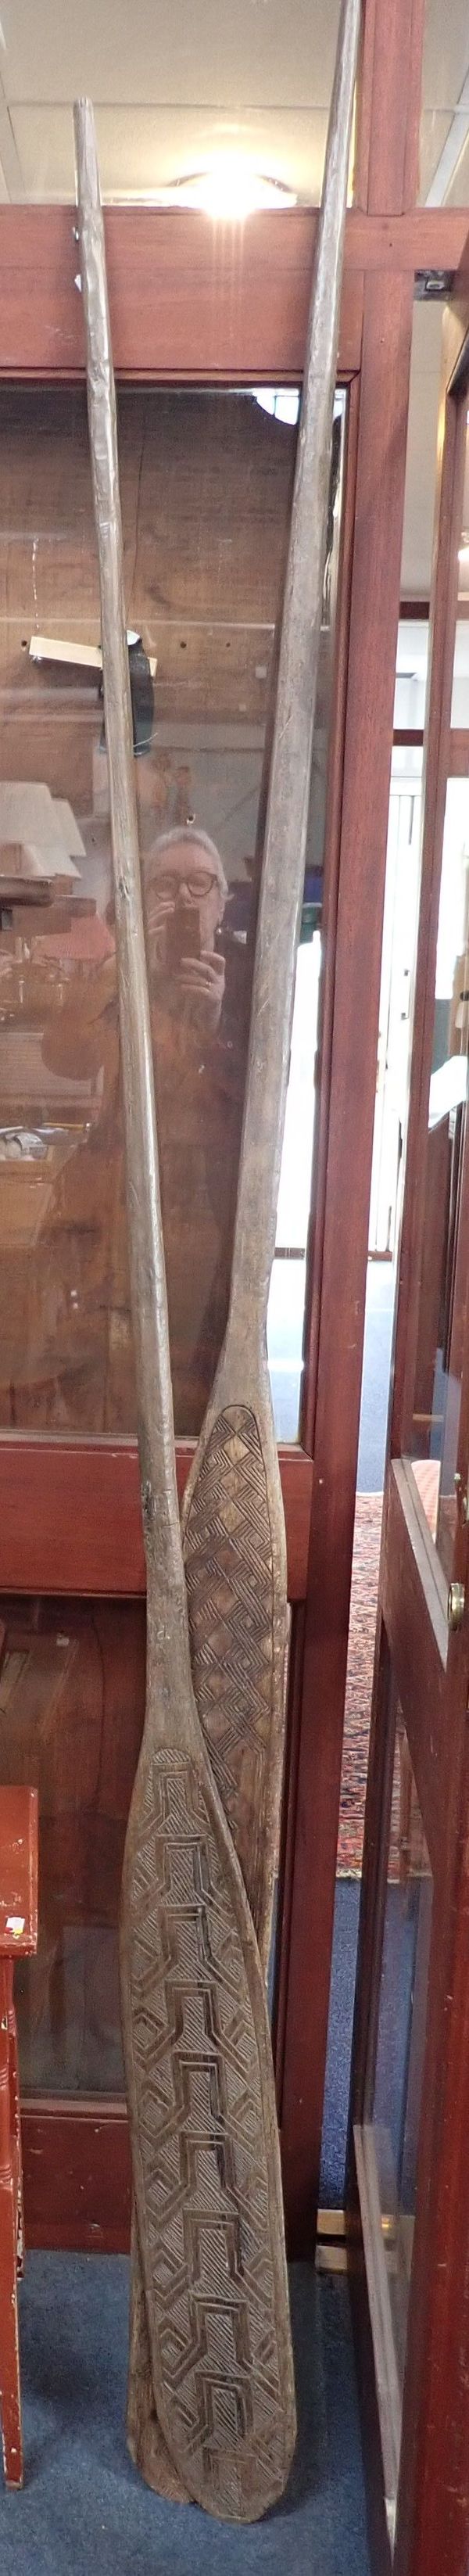 TWO INDONESIAN DECORATIVE WOODEN PADDLES